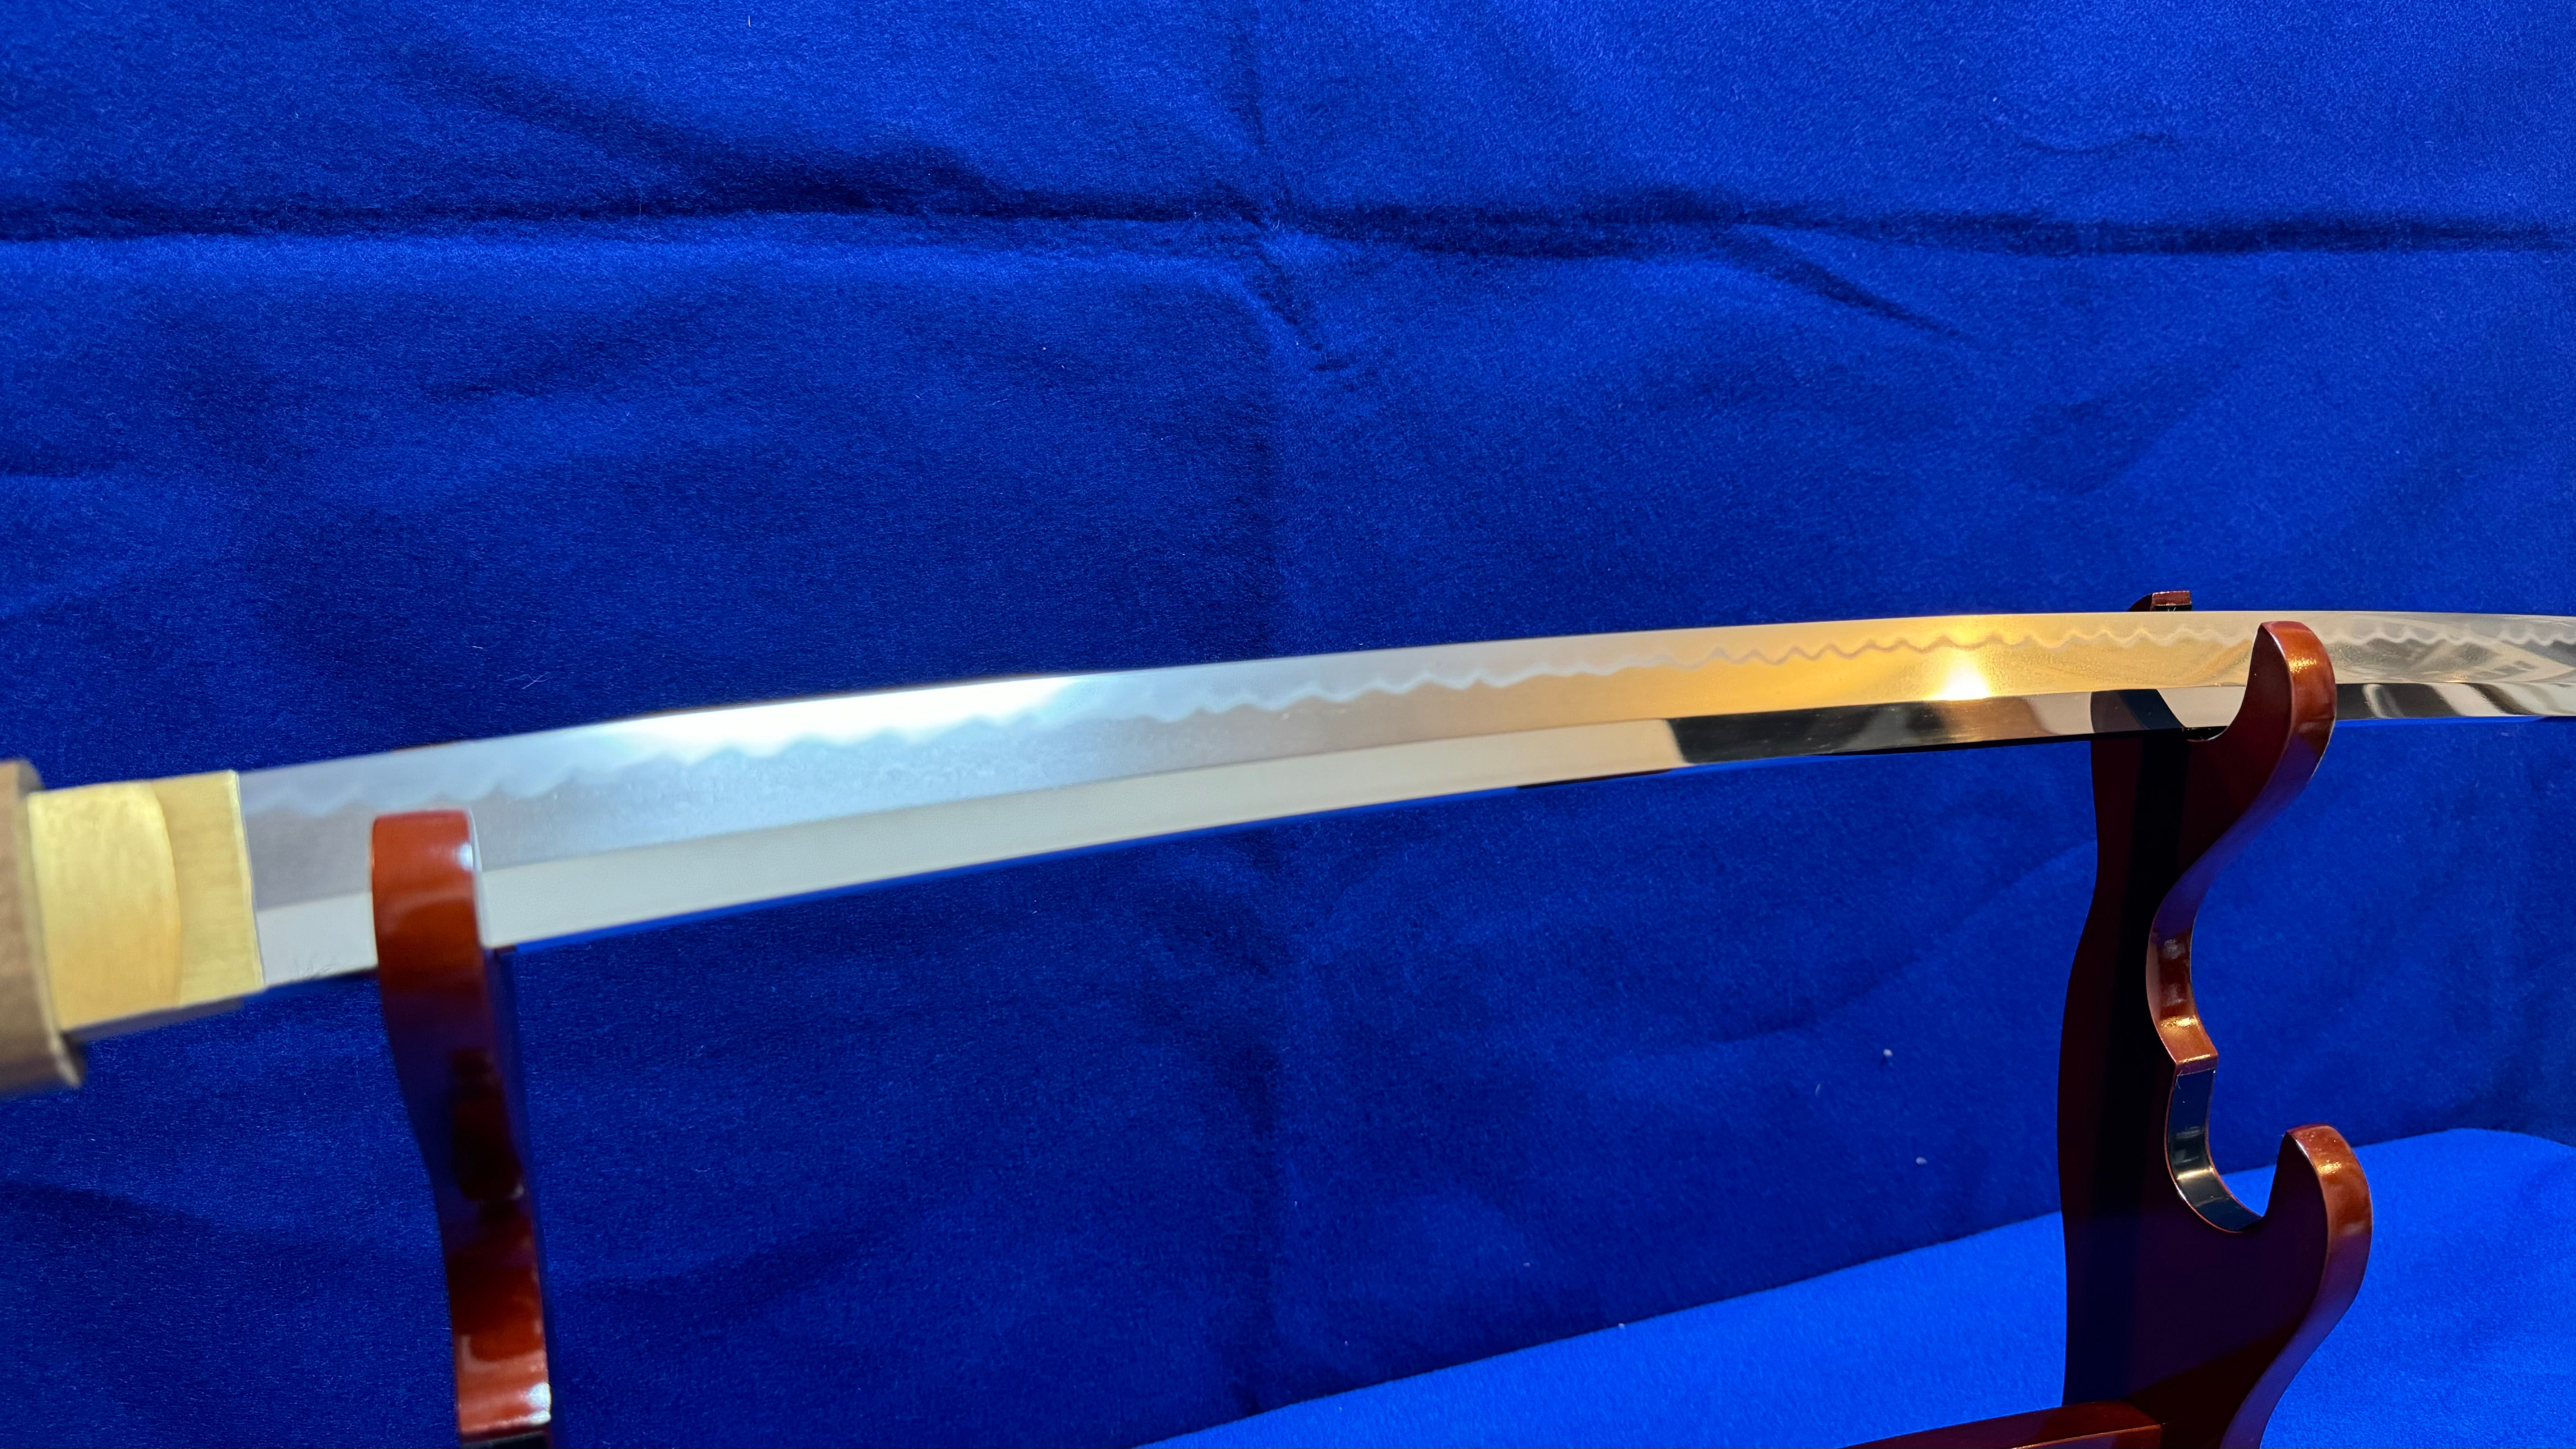 zoomed in photo of a Katana blade, with blue background